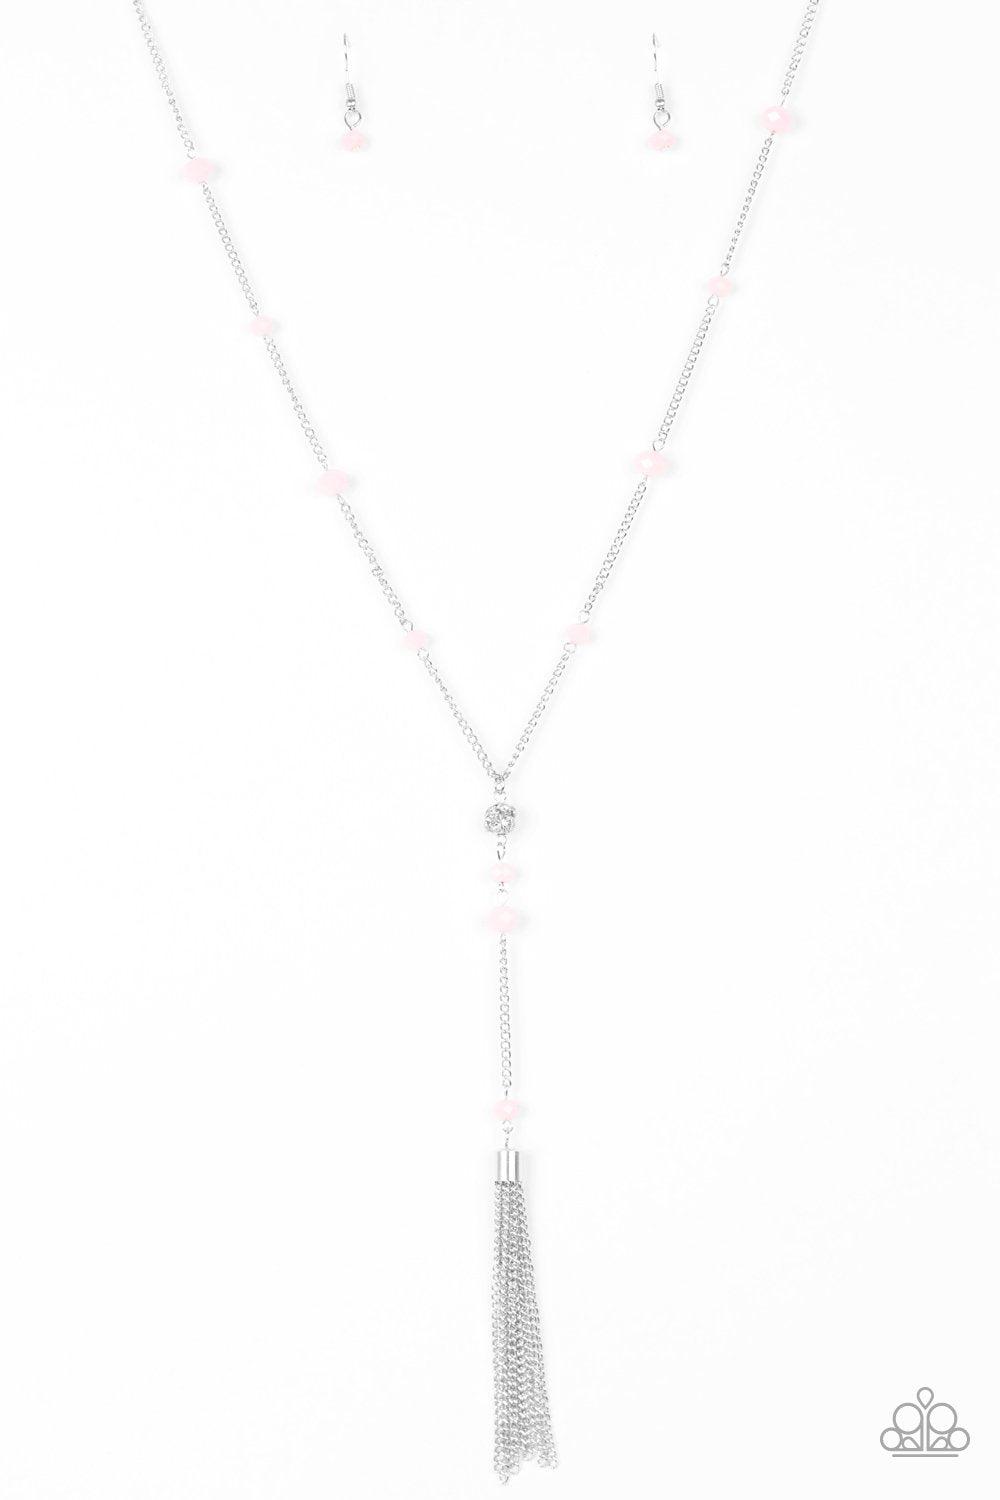 Out All Night Pink and Silver Tassel Necklace - Paparazzi Accessories-CarasShop.com - $5 Jewelry by Cara Jewels